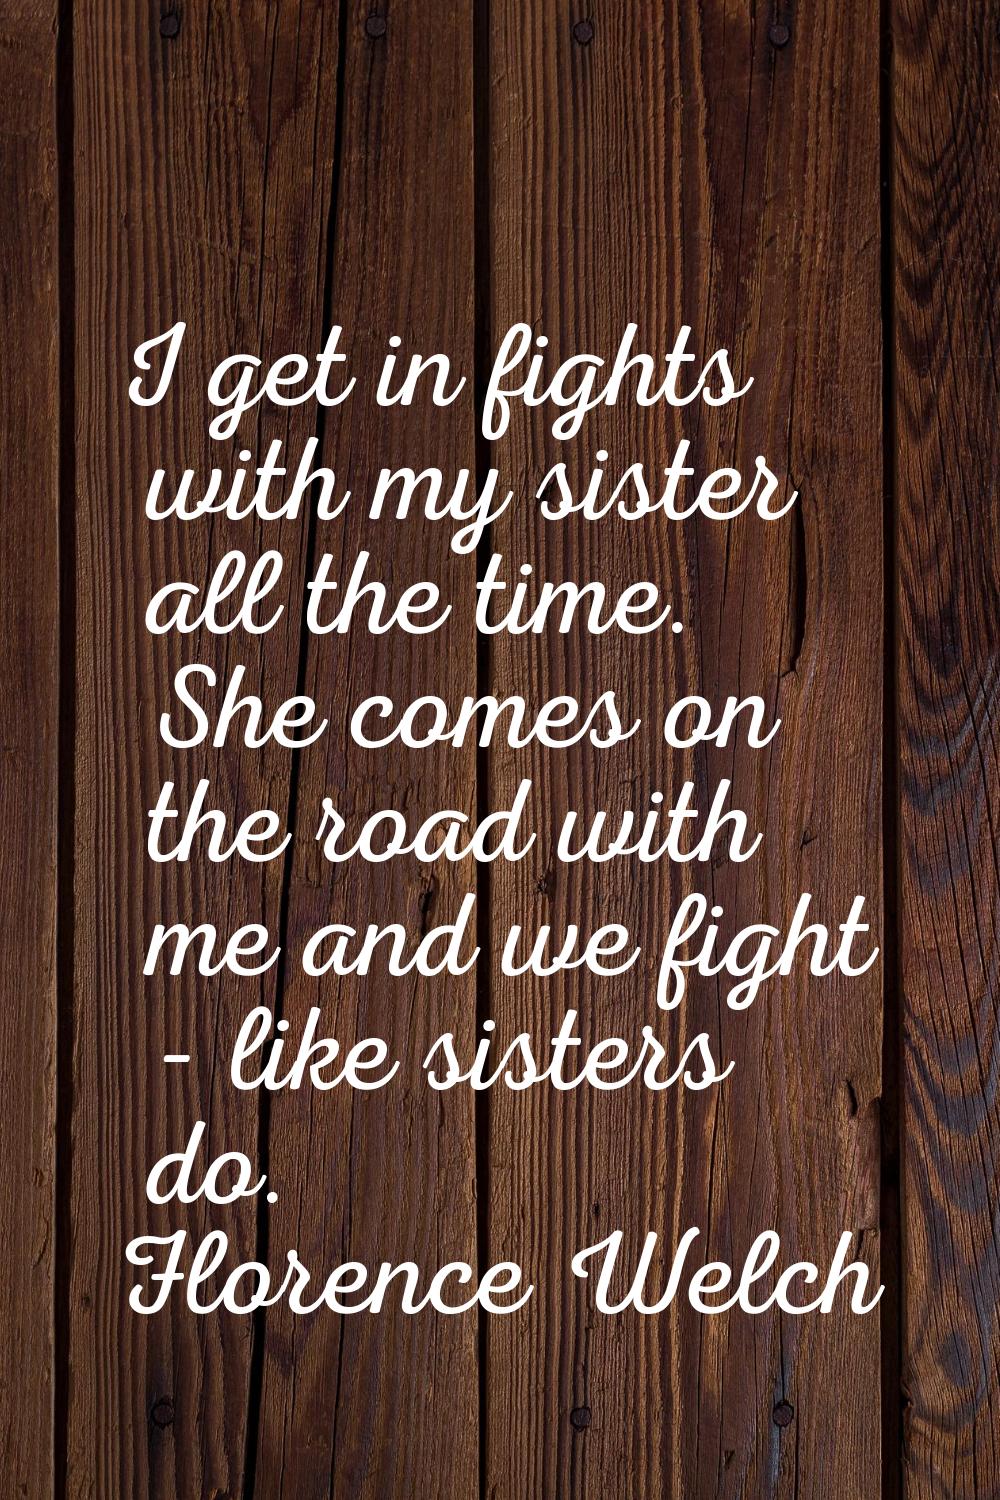 I get in fights with my sister all the time. She comes on the road with me and we fight - like sist